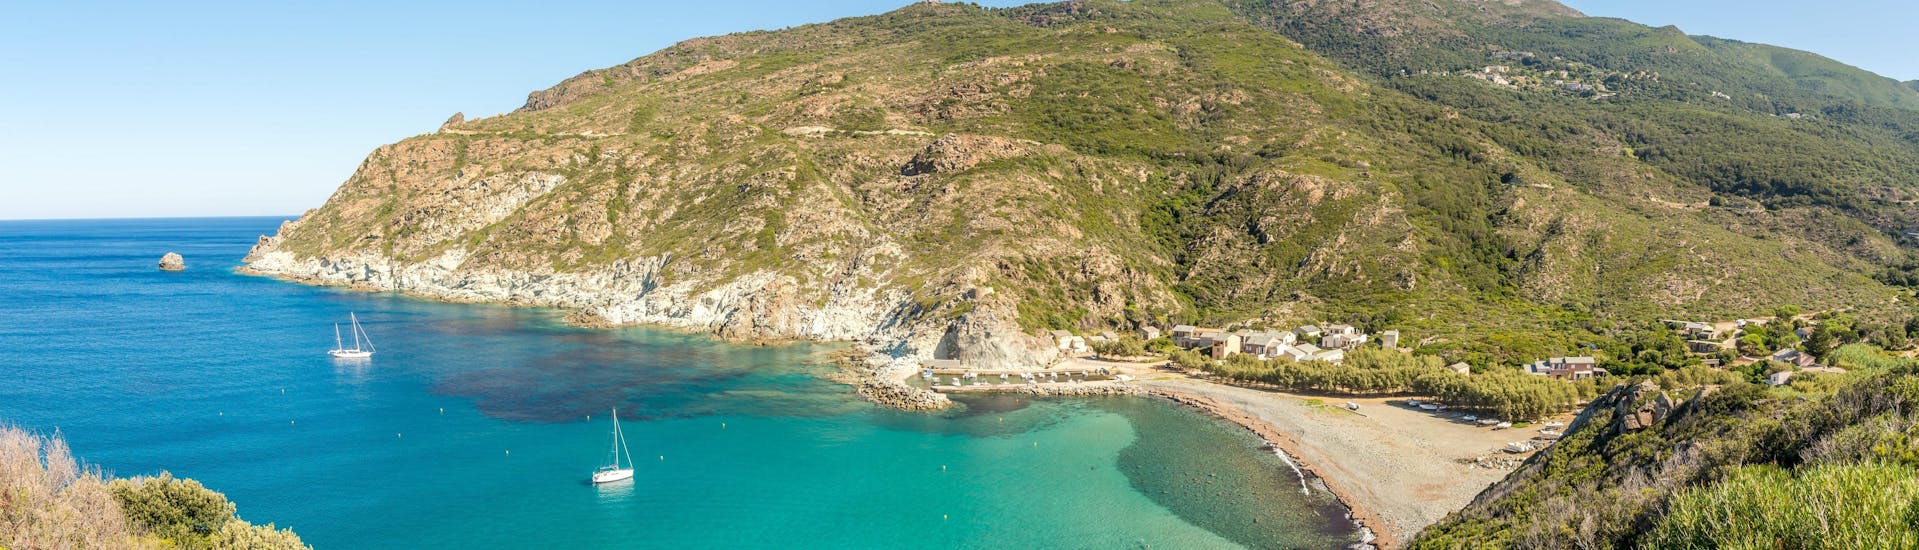 Panoramic view at wild coast of Upper Corsica (Haute Corse), a wonderful location to explore with a boat trip.